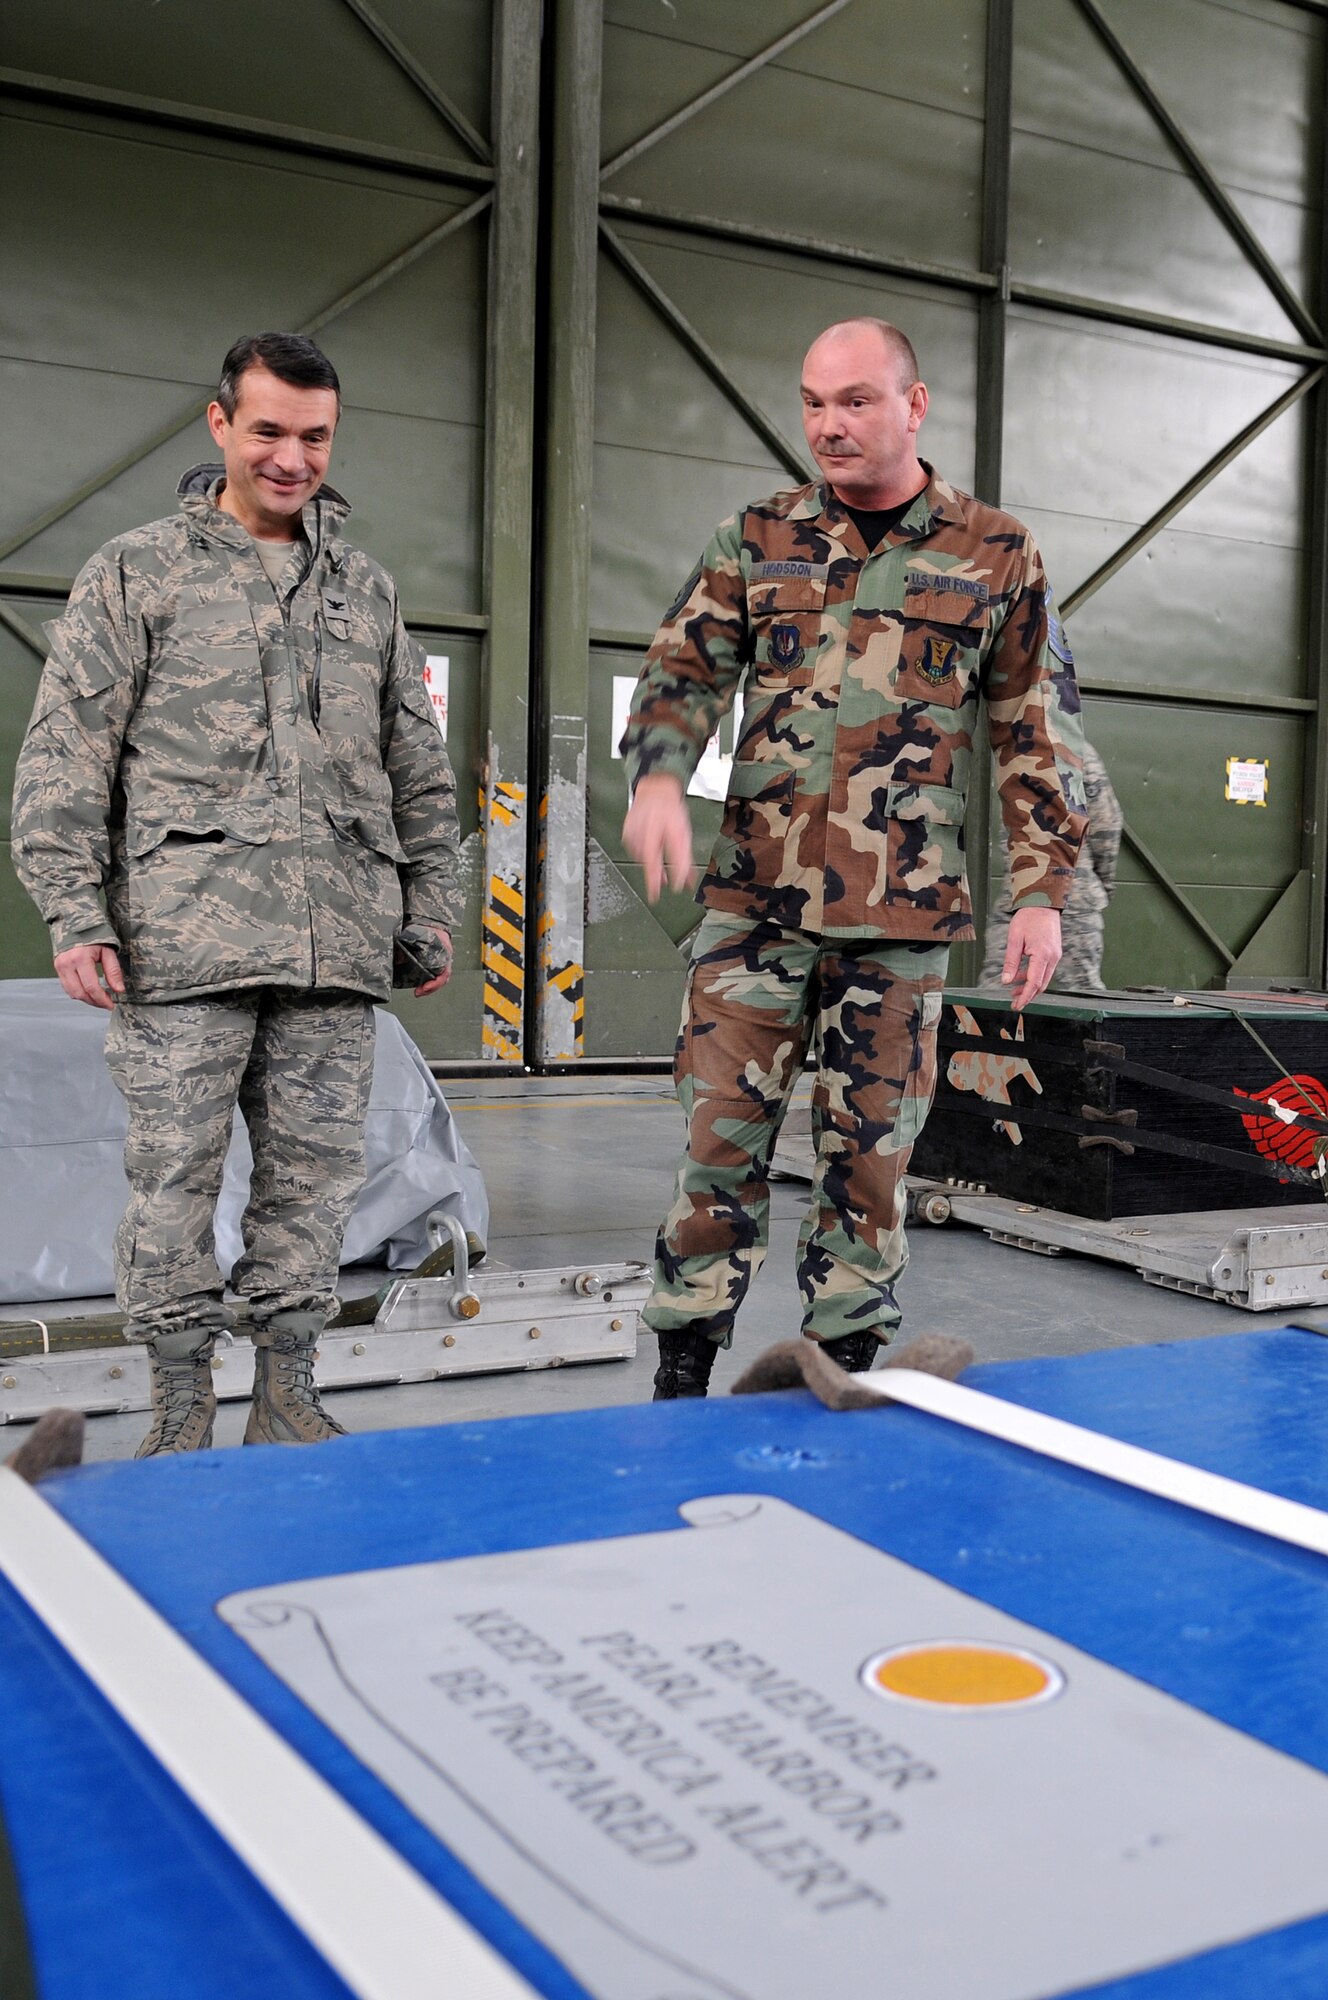 Master Sgt. David Hudson (right), 435th Logistics Readiness Squadron Aerial Delivery Riggers, showcases a heavy-cargo box to U.S. Air Force Col. Donald Bacon, 435 ABW commander at Ramstein Air Base Jan. 16, 2009. Airmen in the 435th LRS painted each of the heavy-cargo boxes with different tributes to military and U.S. events such as September 11 and Pearl Harbor. Their latest tribute was to Colonel Bacon and the 435th ABW. (U.S. Air Force photo by Airman 1st Class Grovert Fuentes-Contreras)